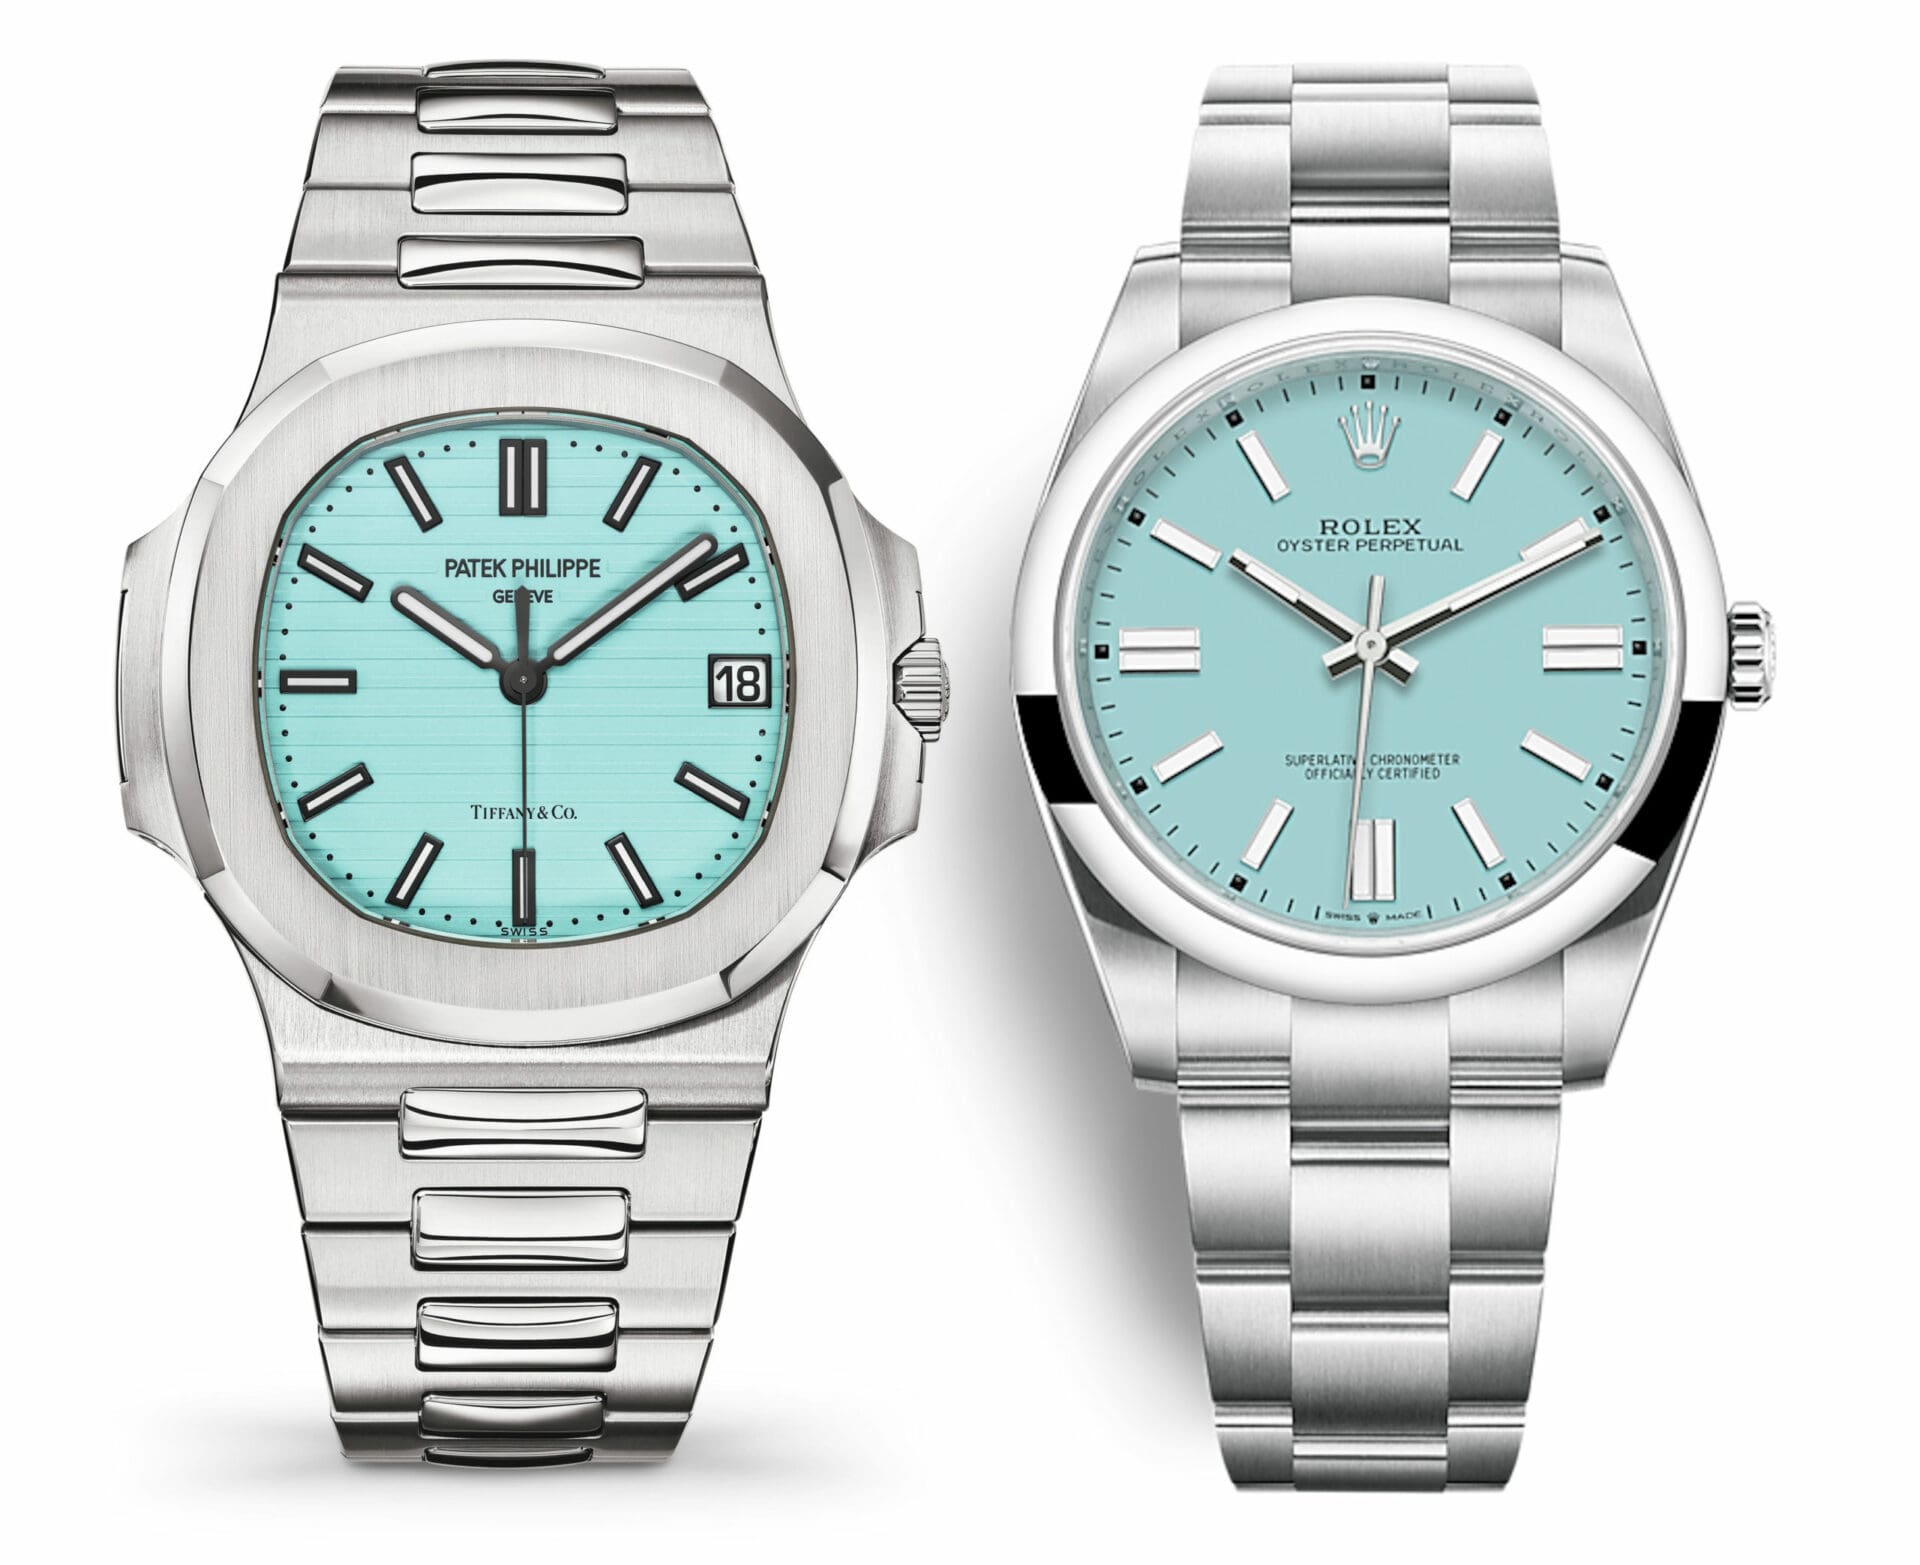 WATCH ANALYTICS WEDNESDAYS: How the Tiffany Blue Nautilus affected the Rolex OP Turquoise price